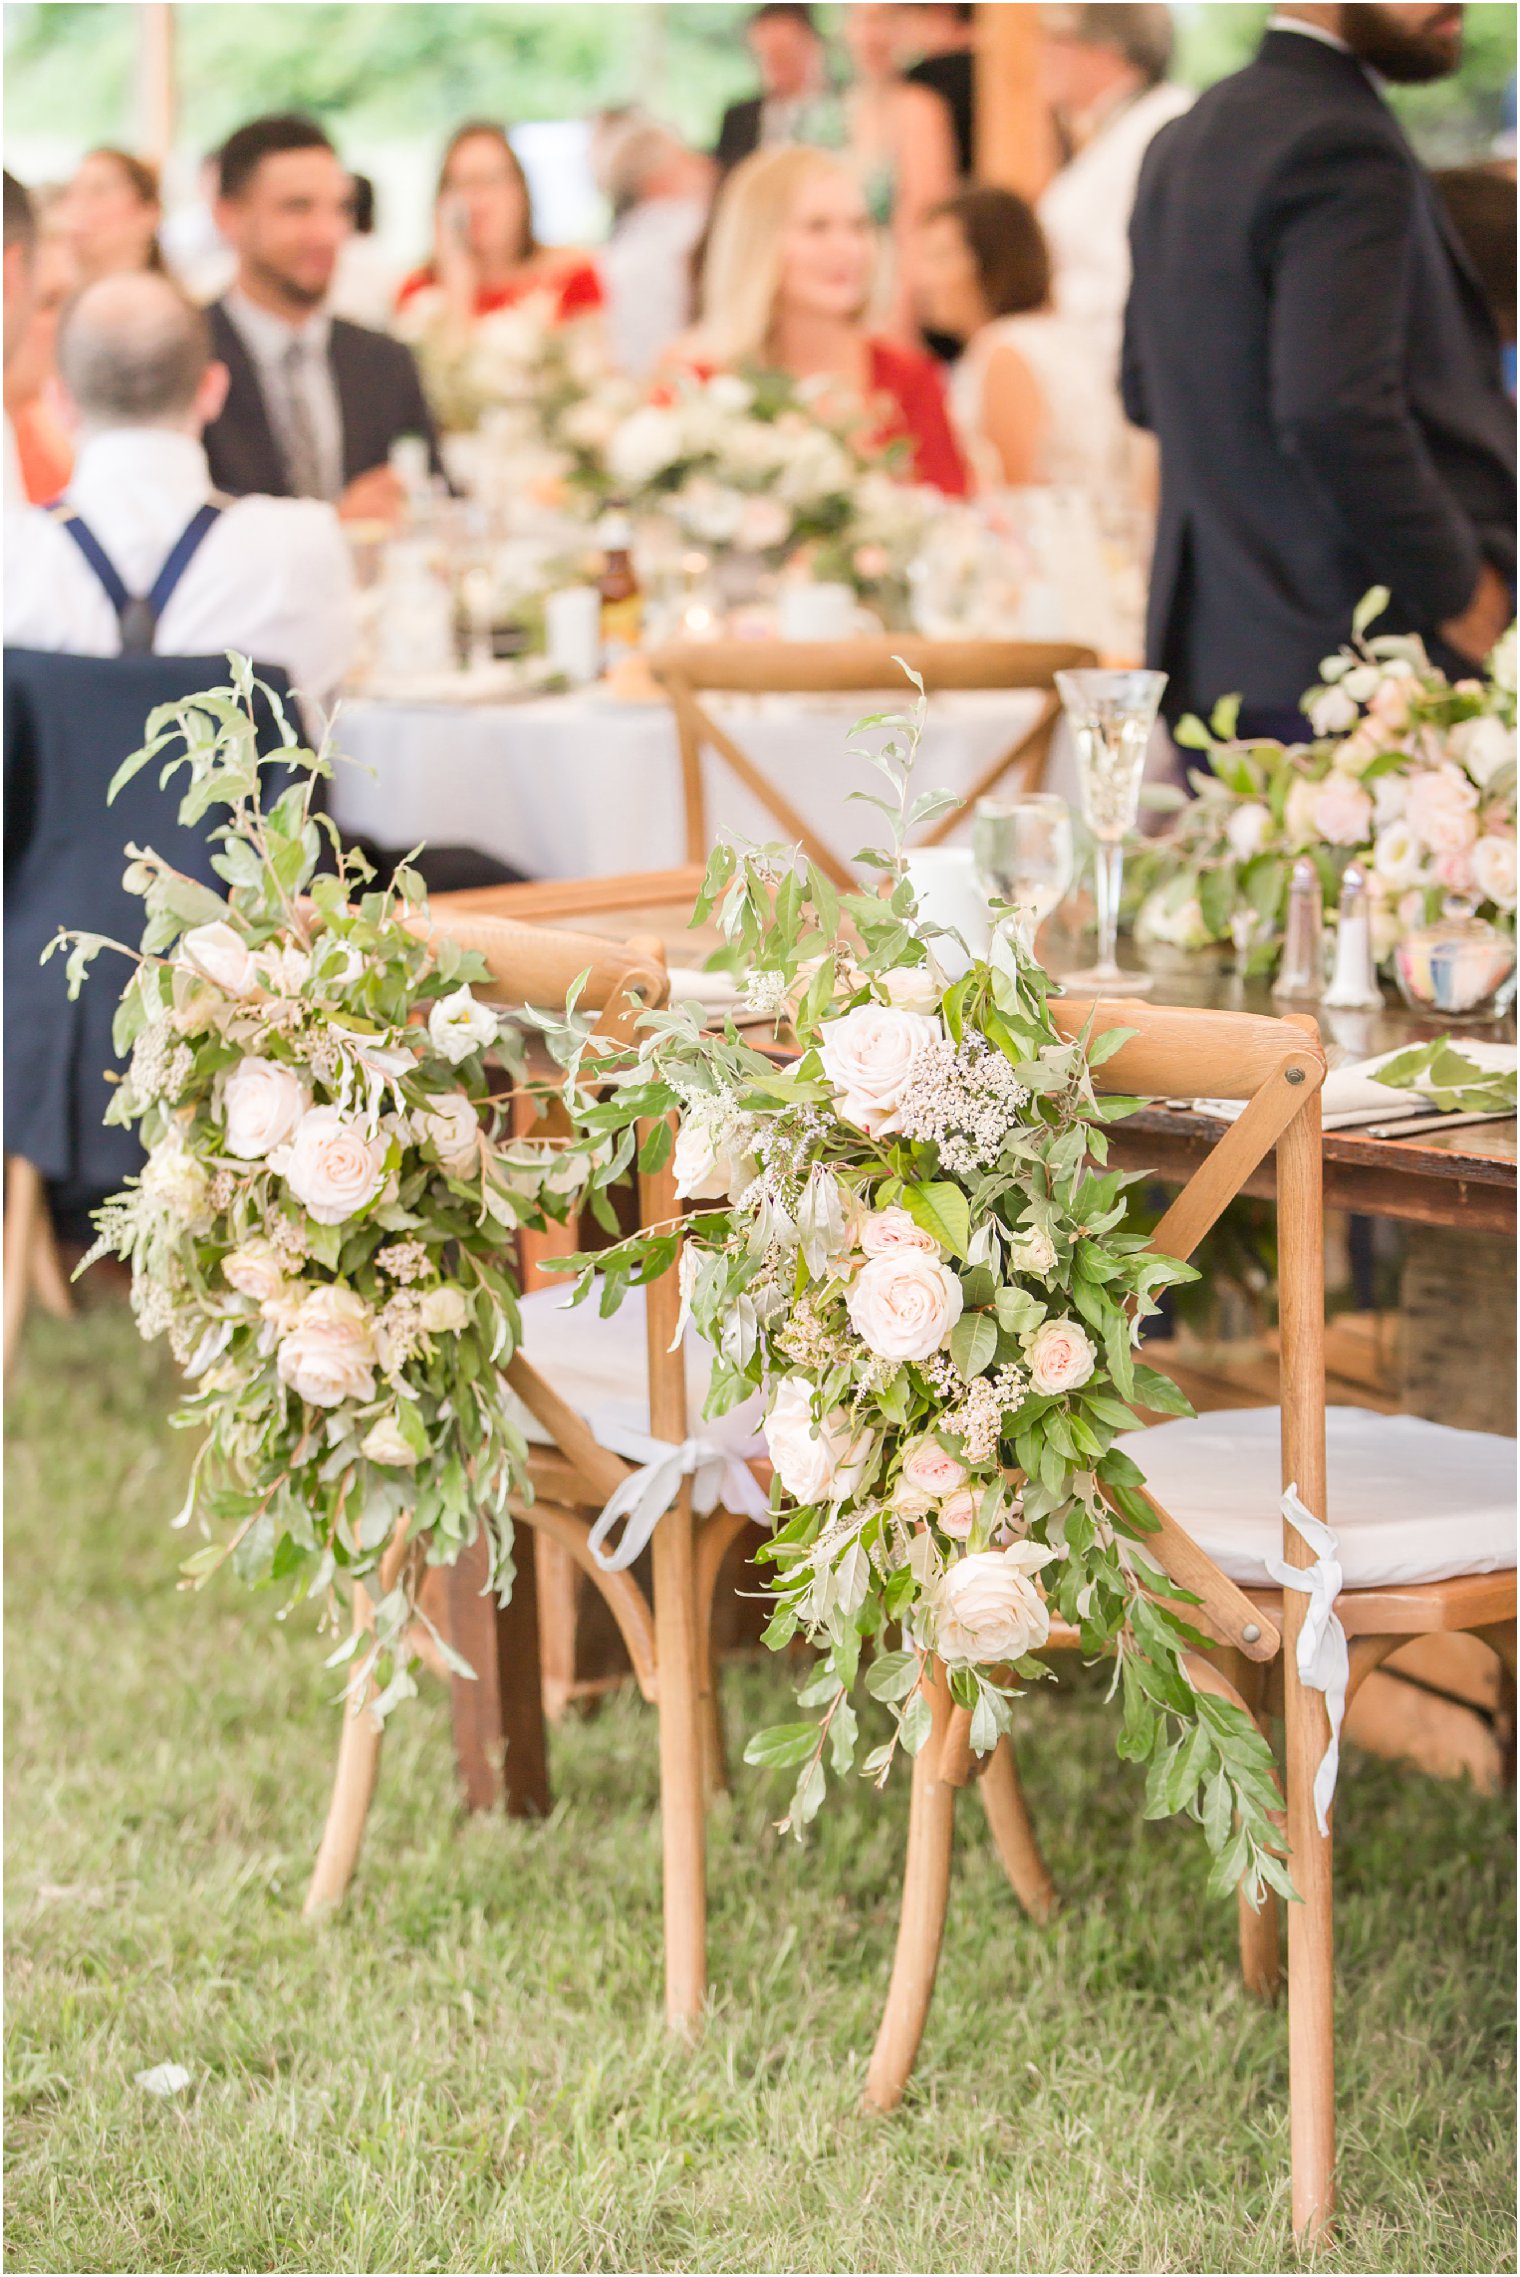 Sweetheart table chairs with romantic florals